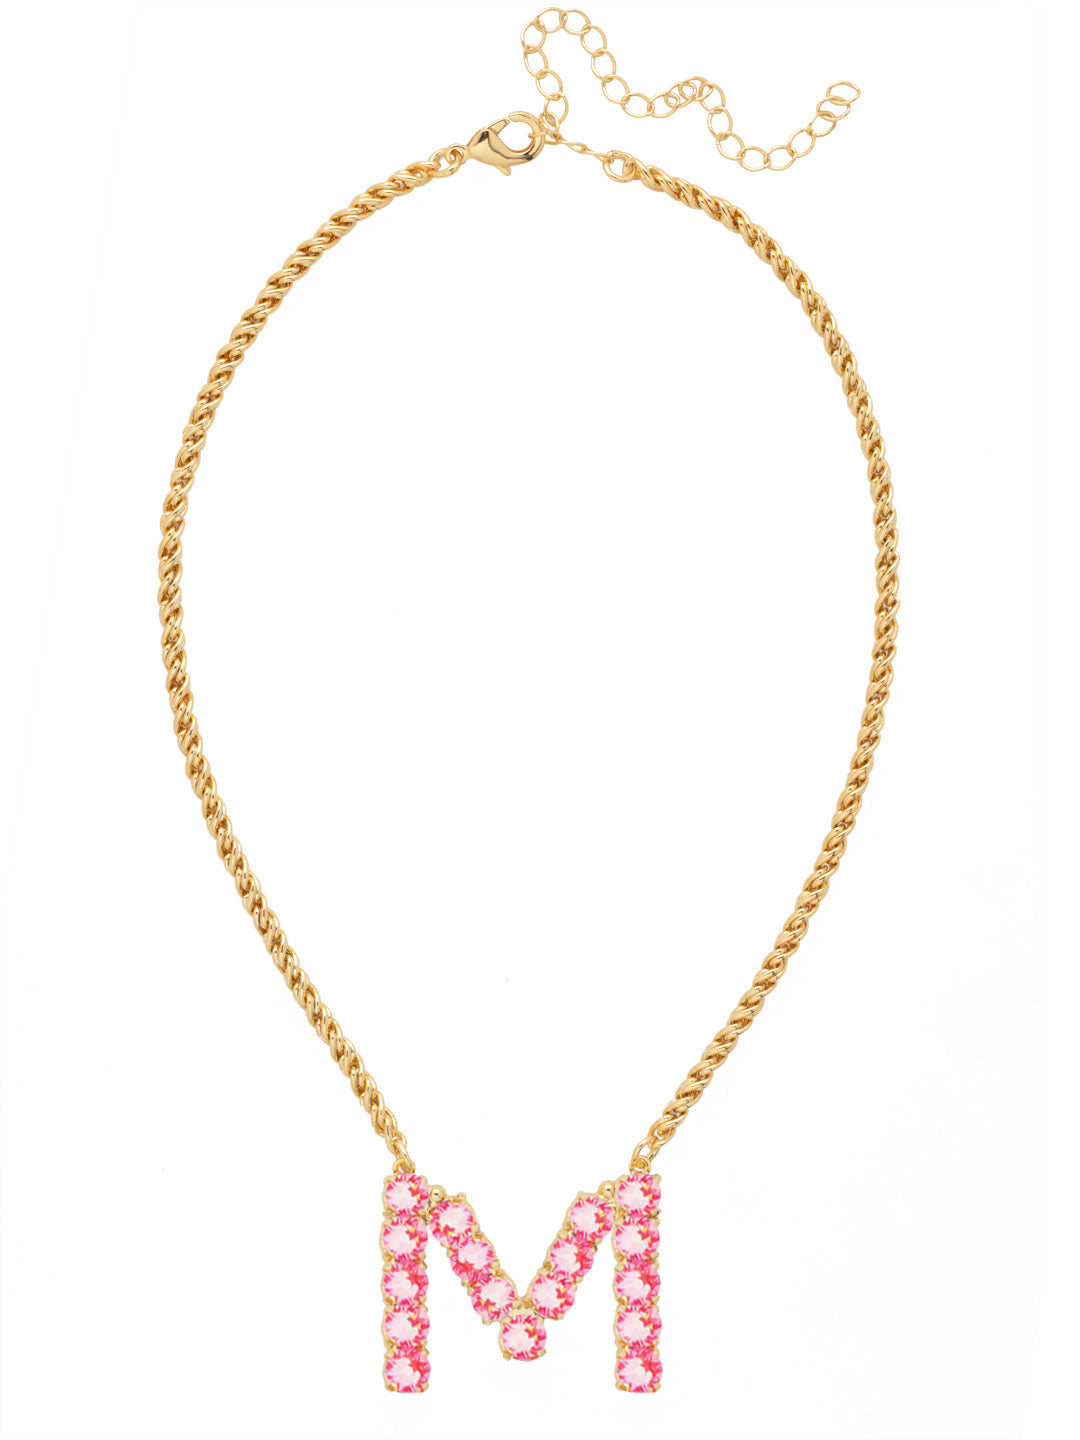 M Initial Rope Pendant Necklace - NFK32BGETP - <p>The Initial Rope Pendant Necklace features a crystal encrusted metal monogram pendant on an adjustable rope chain, secured with a lobster claw clasp. From Sorrelli's Electric Pink collection in our Bright Gold-tone finish.</p>